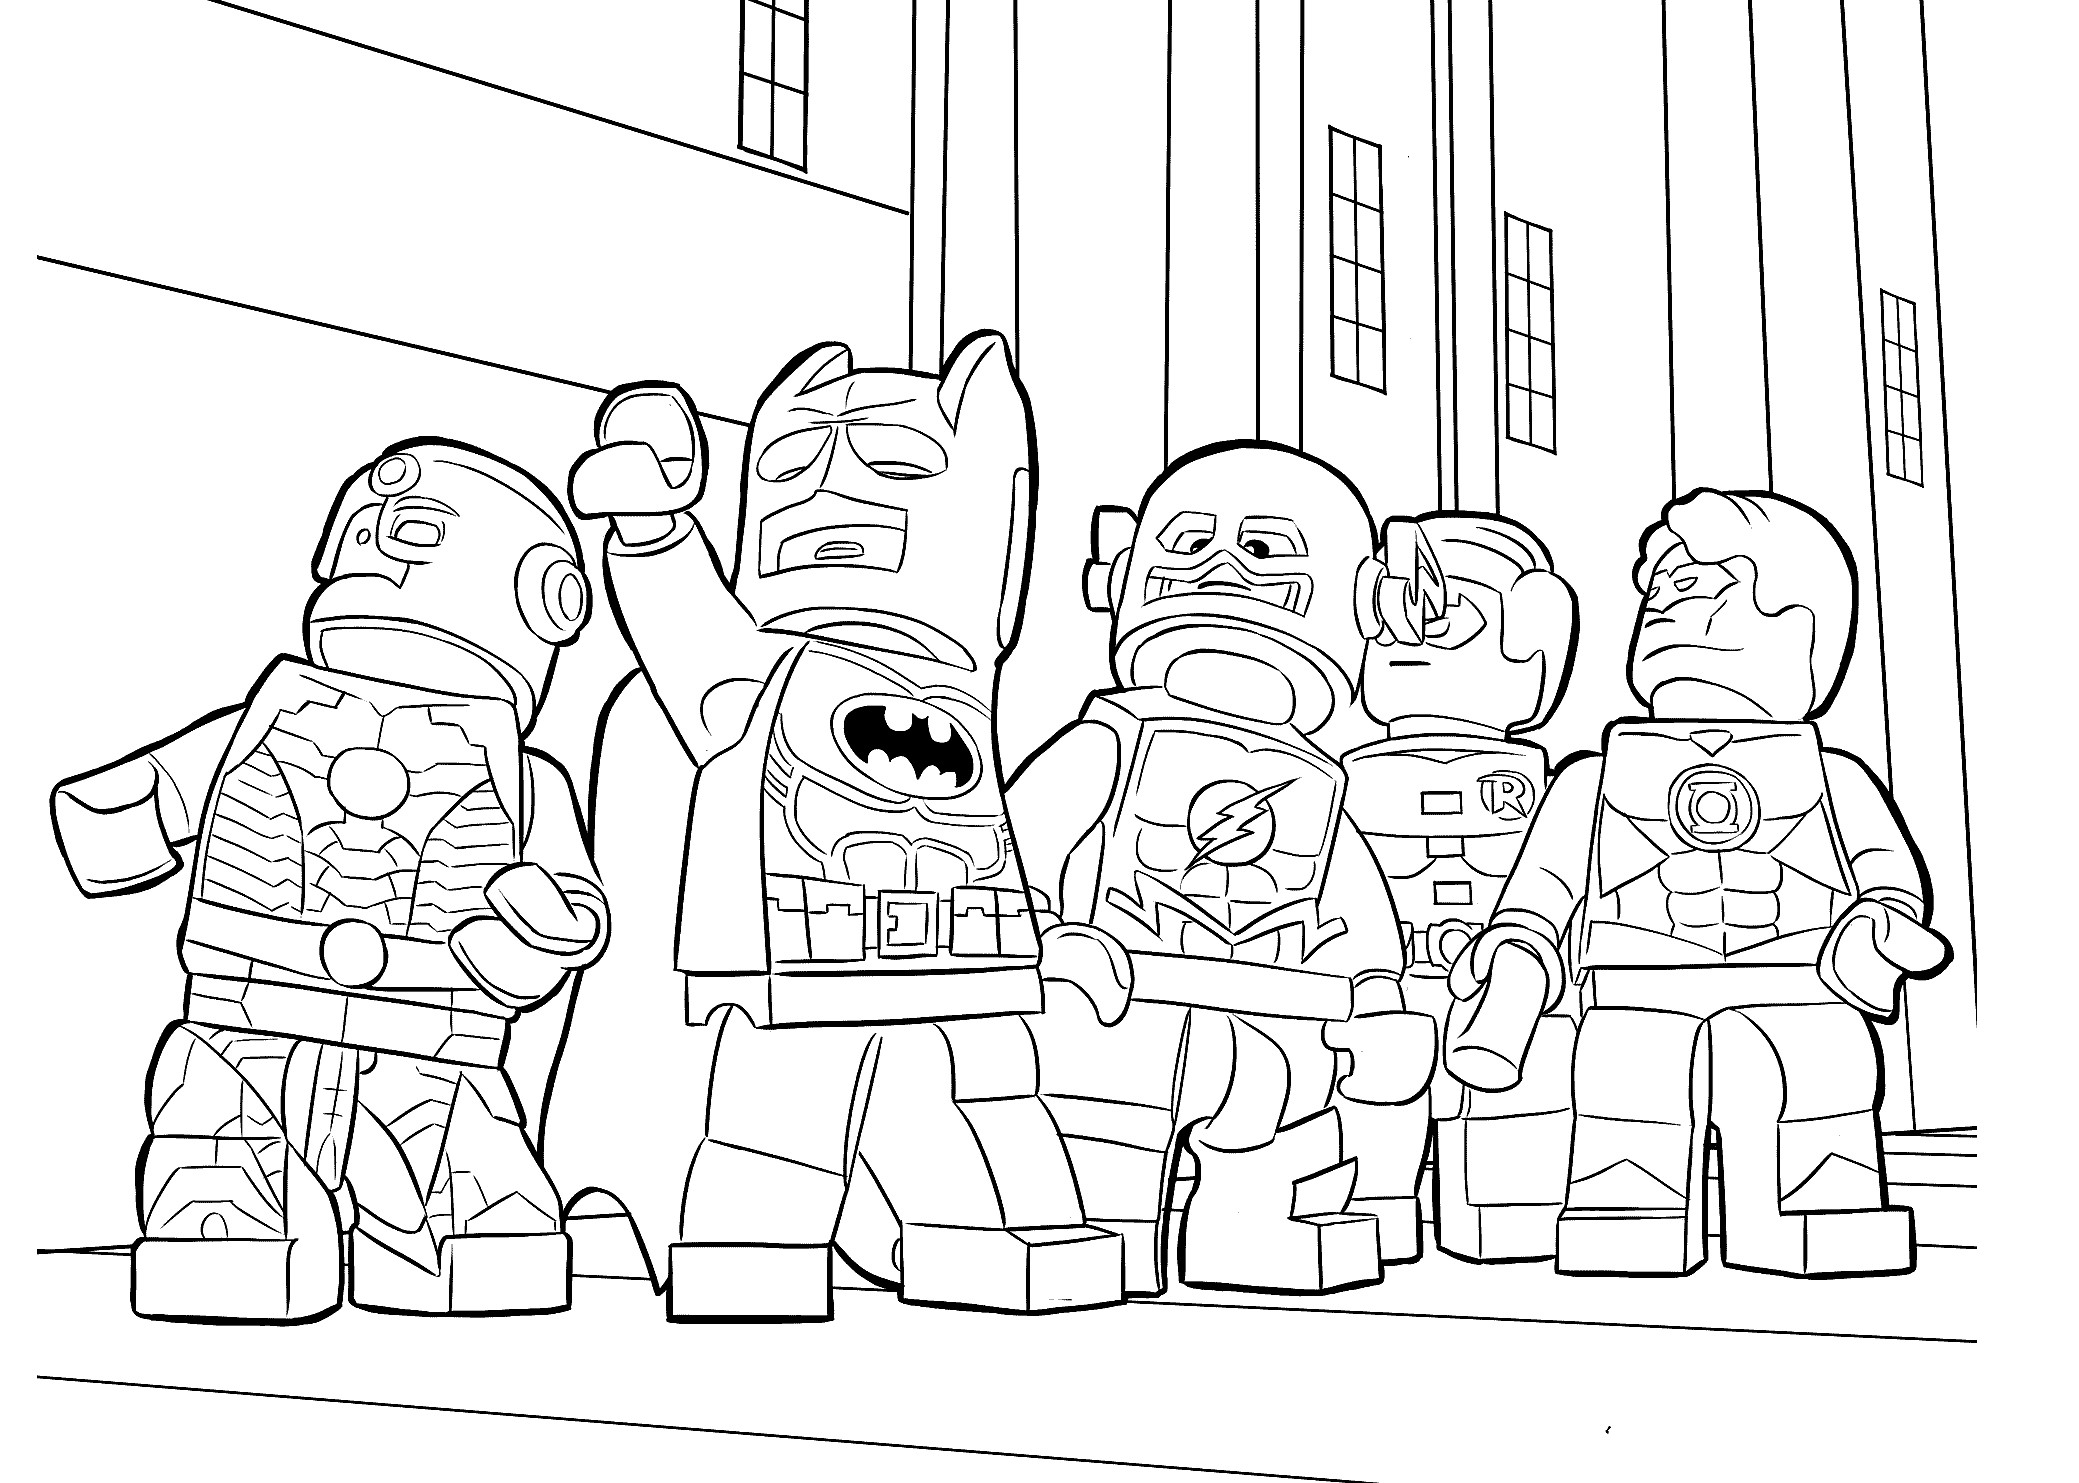 Coloring Pages Printable For Boys
 Lego heroes coloring page for boys printable free Lego